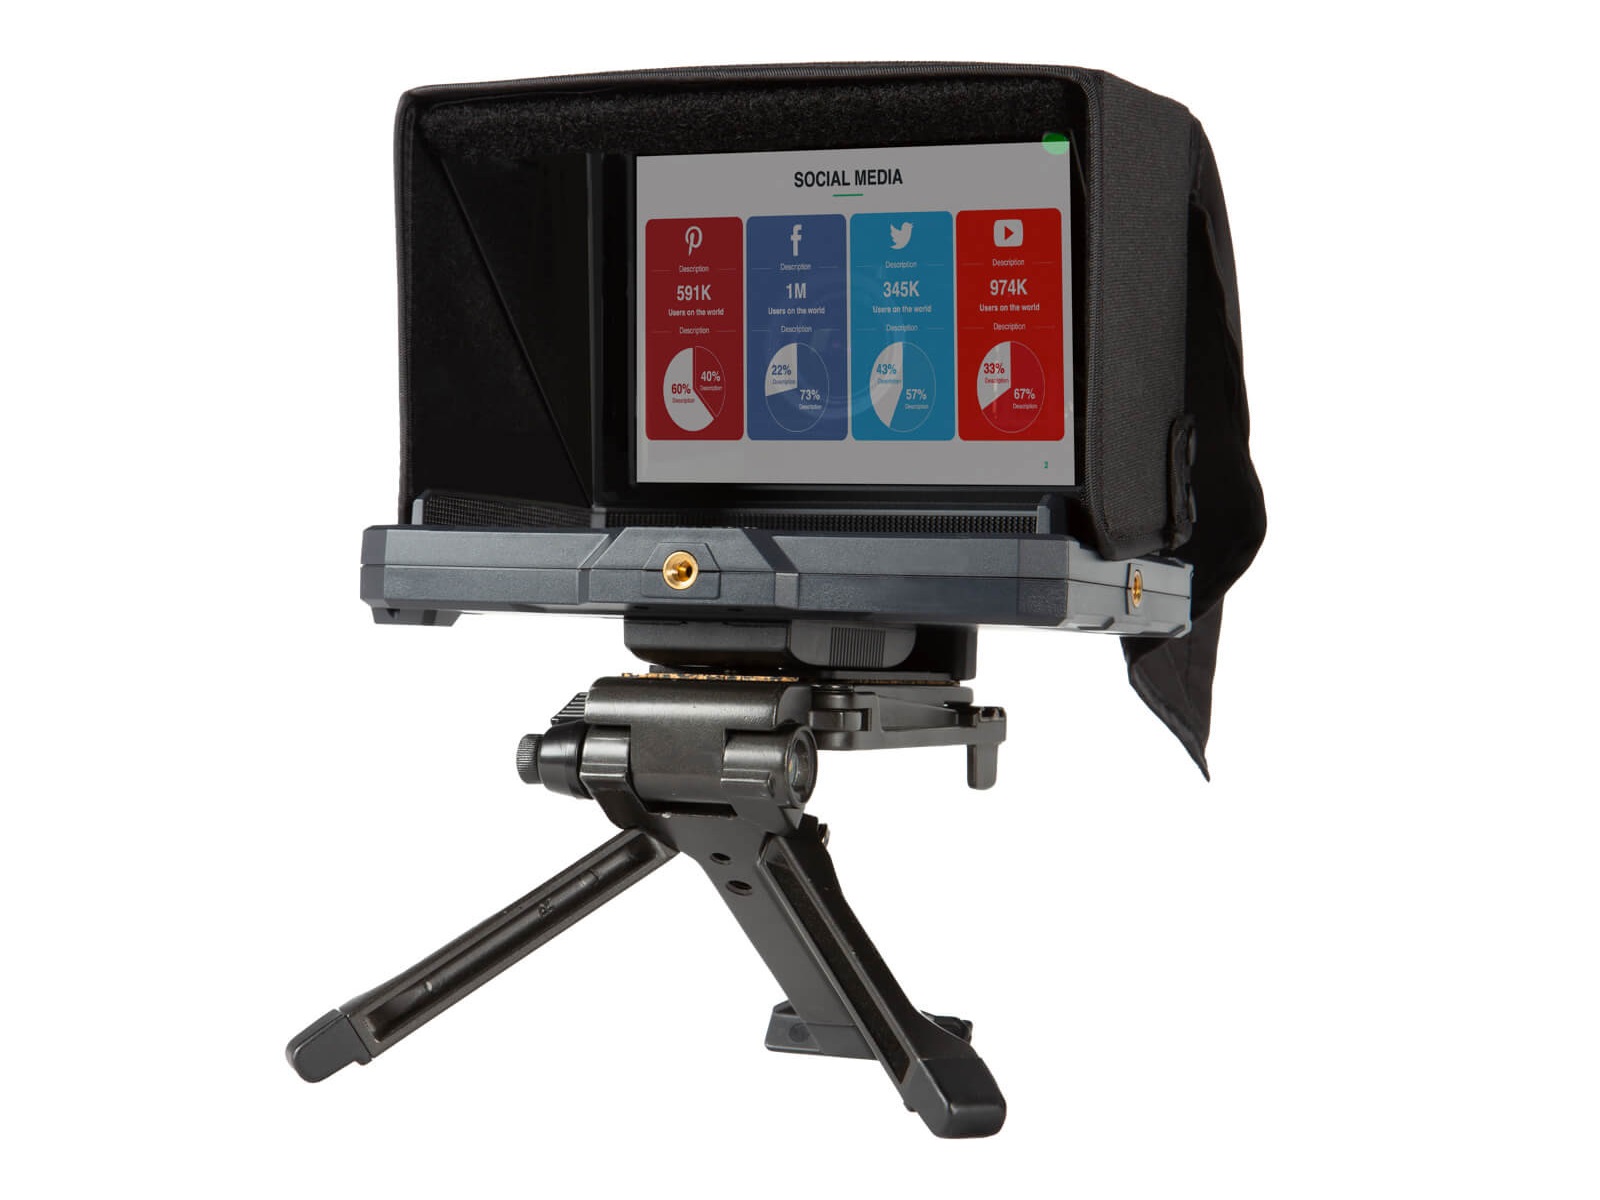 TTL-100 Through the Lens Kit for 7 inch Monitor by Datavideo